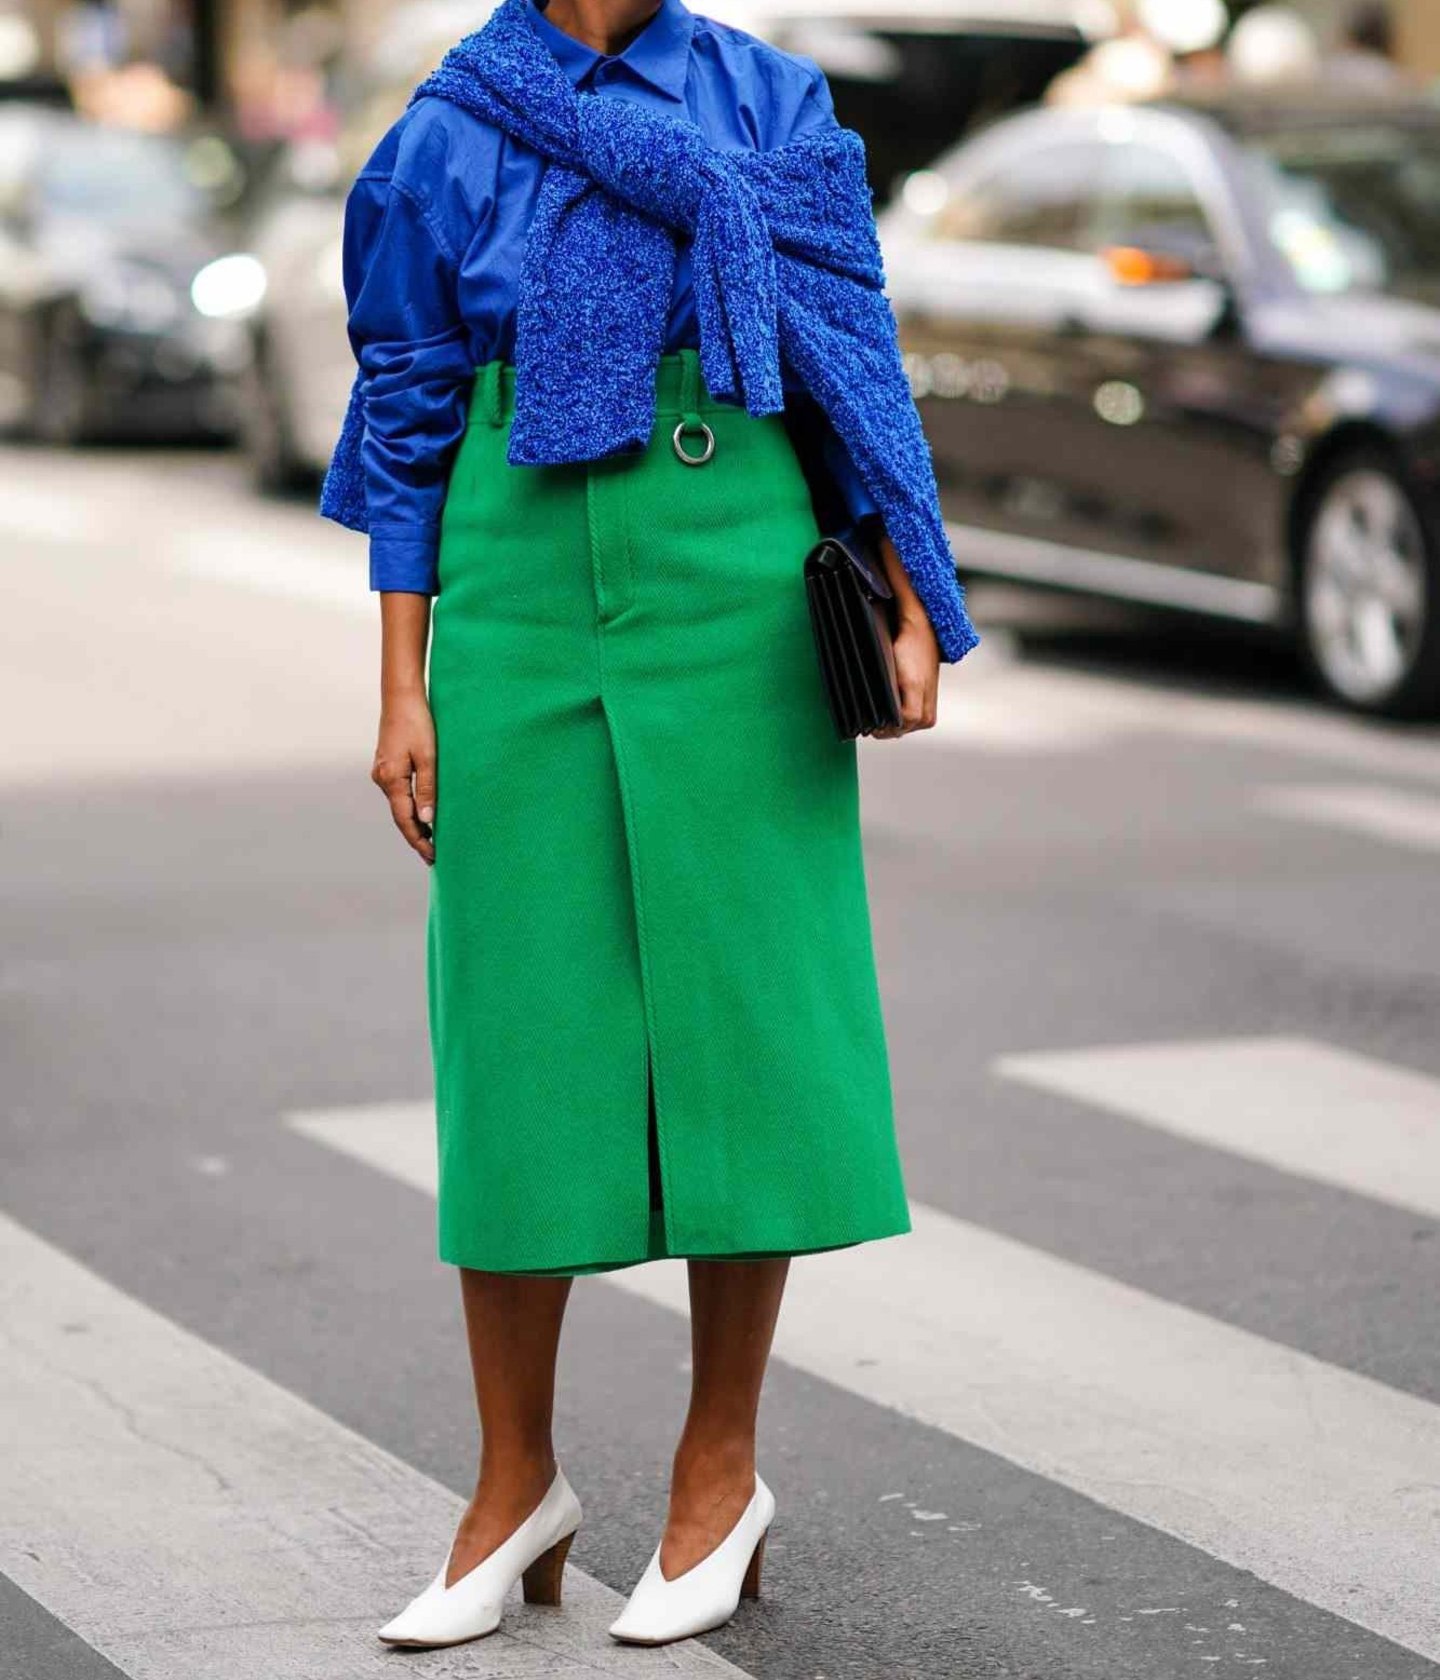 Blue and green outfit